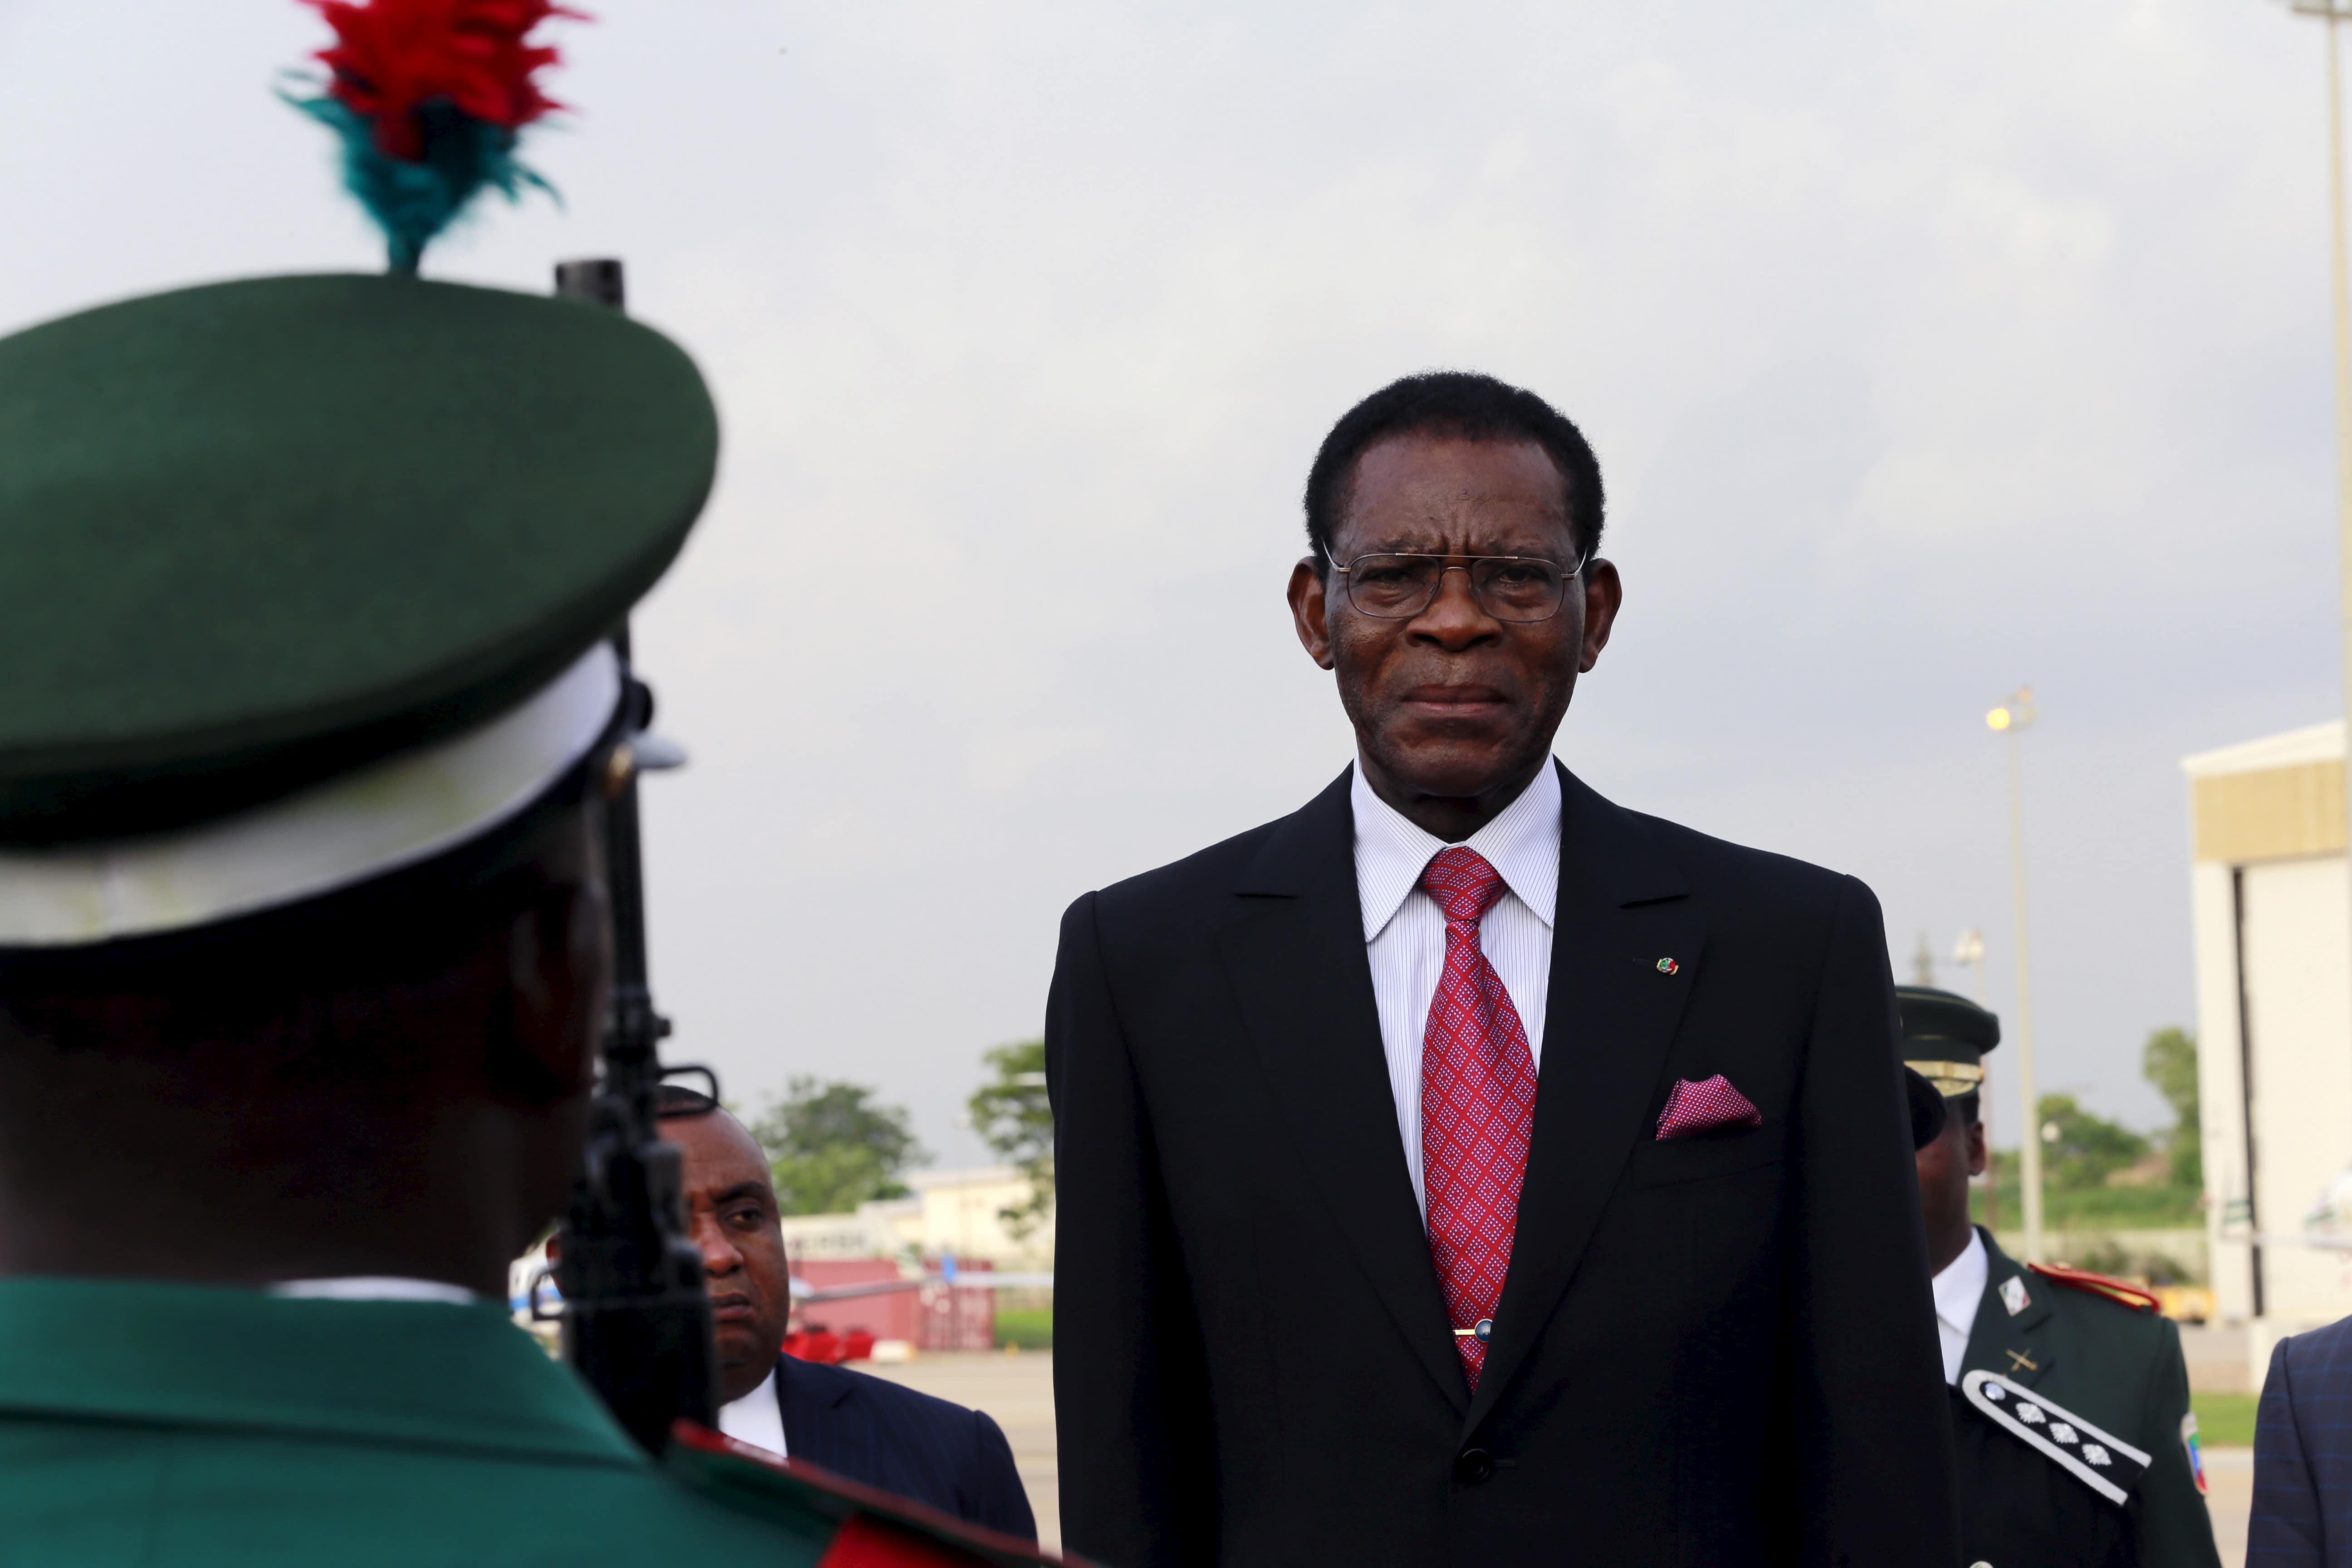 Equatorial Guinea's President Teodoro Obiang Nguema Mbasogo inspects a guard of honour upon his arrival at the presidential airport in Abuja, Nigeria, 28 May 2015, REUTERS/Afolabi Sotunde